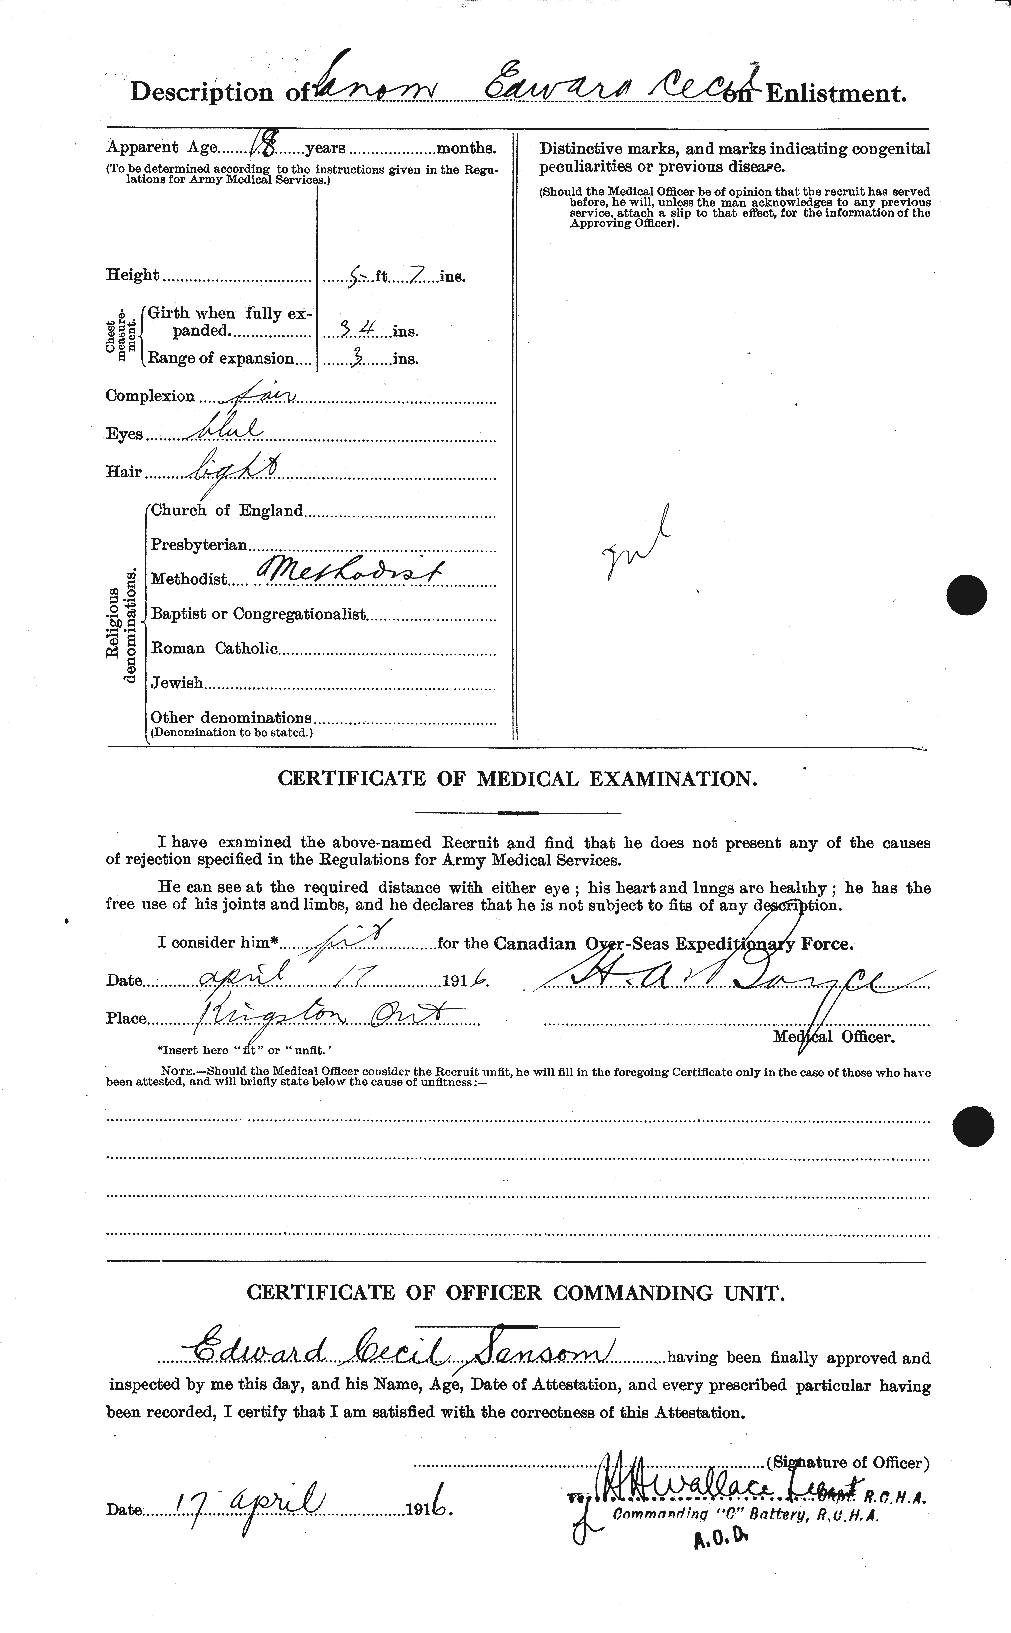 Personnel Records of the First World War - CEF 081408b